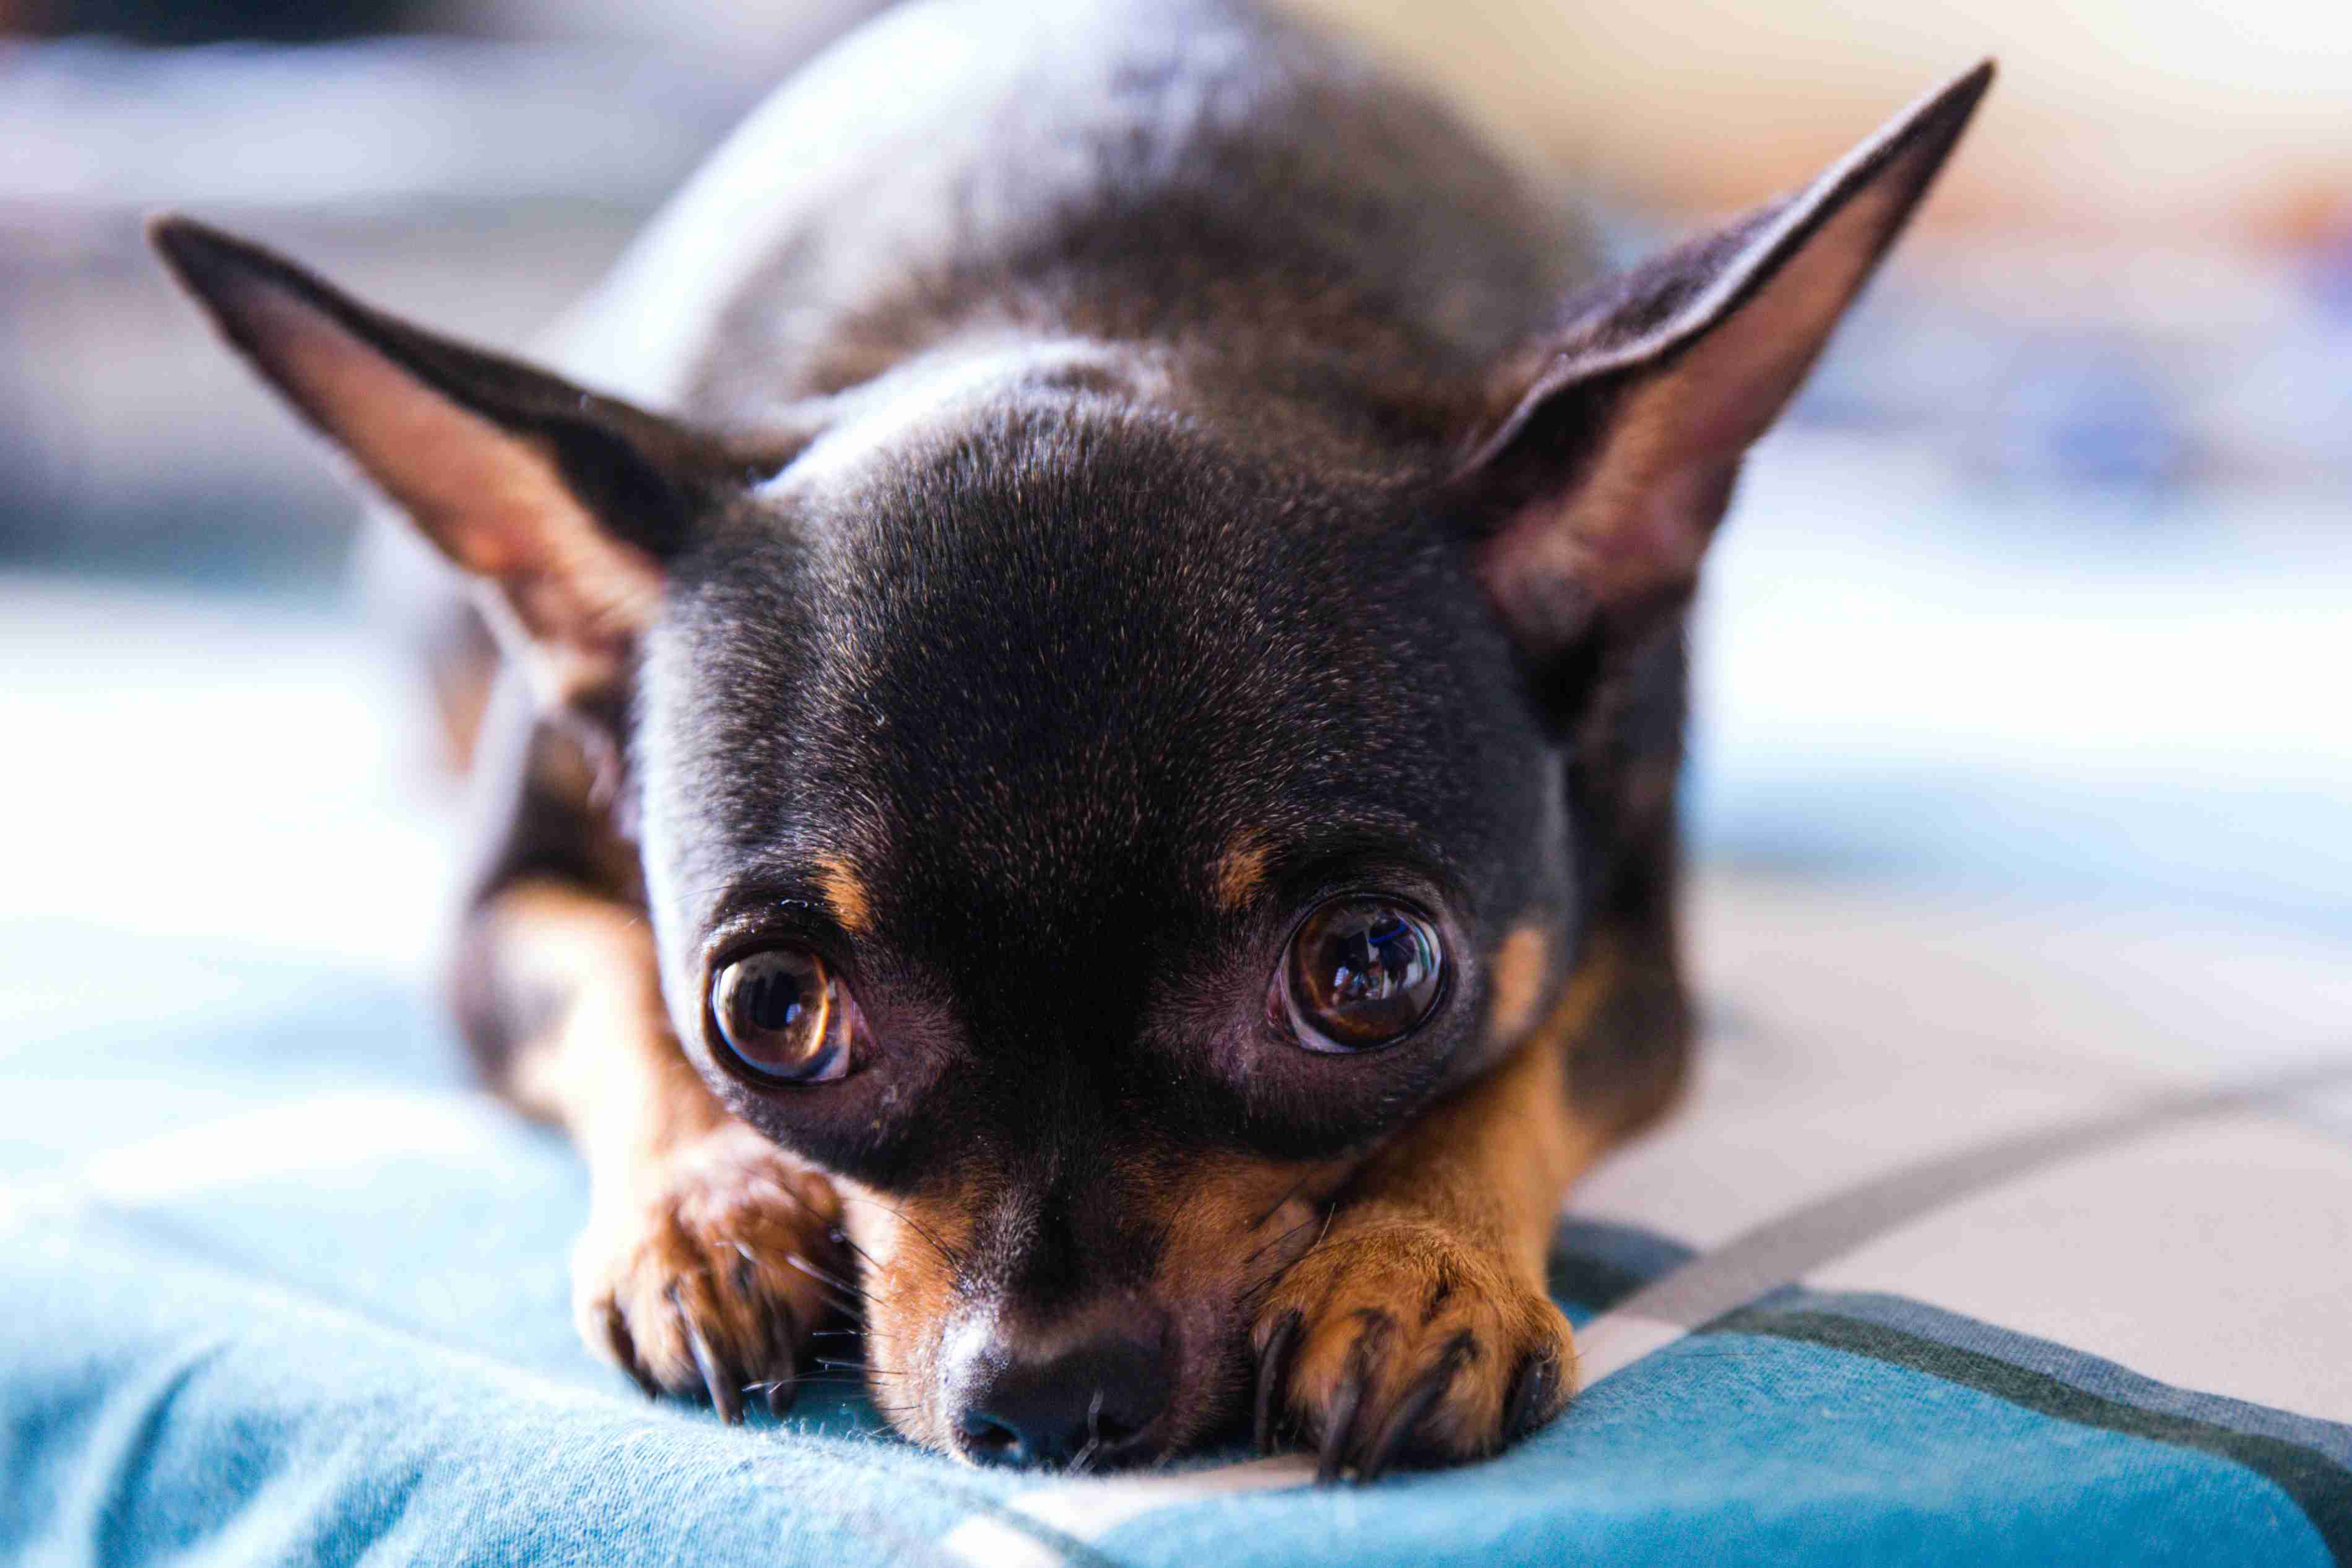 What causes aggression and anger issues in Chihuahuas?